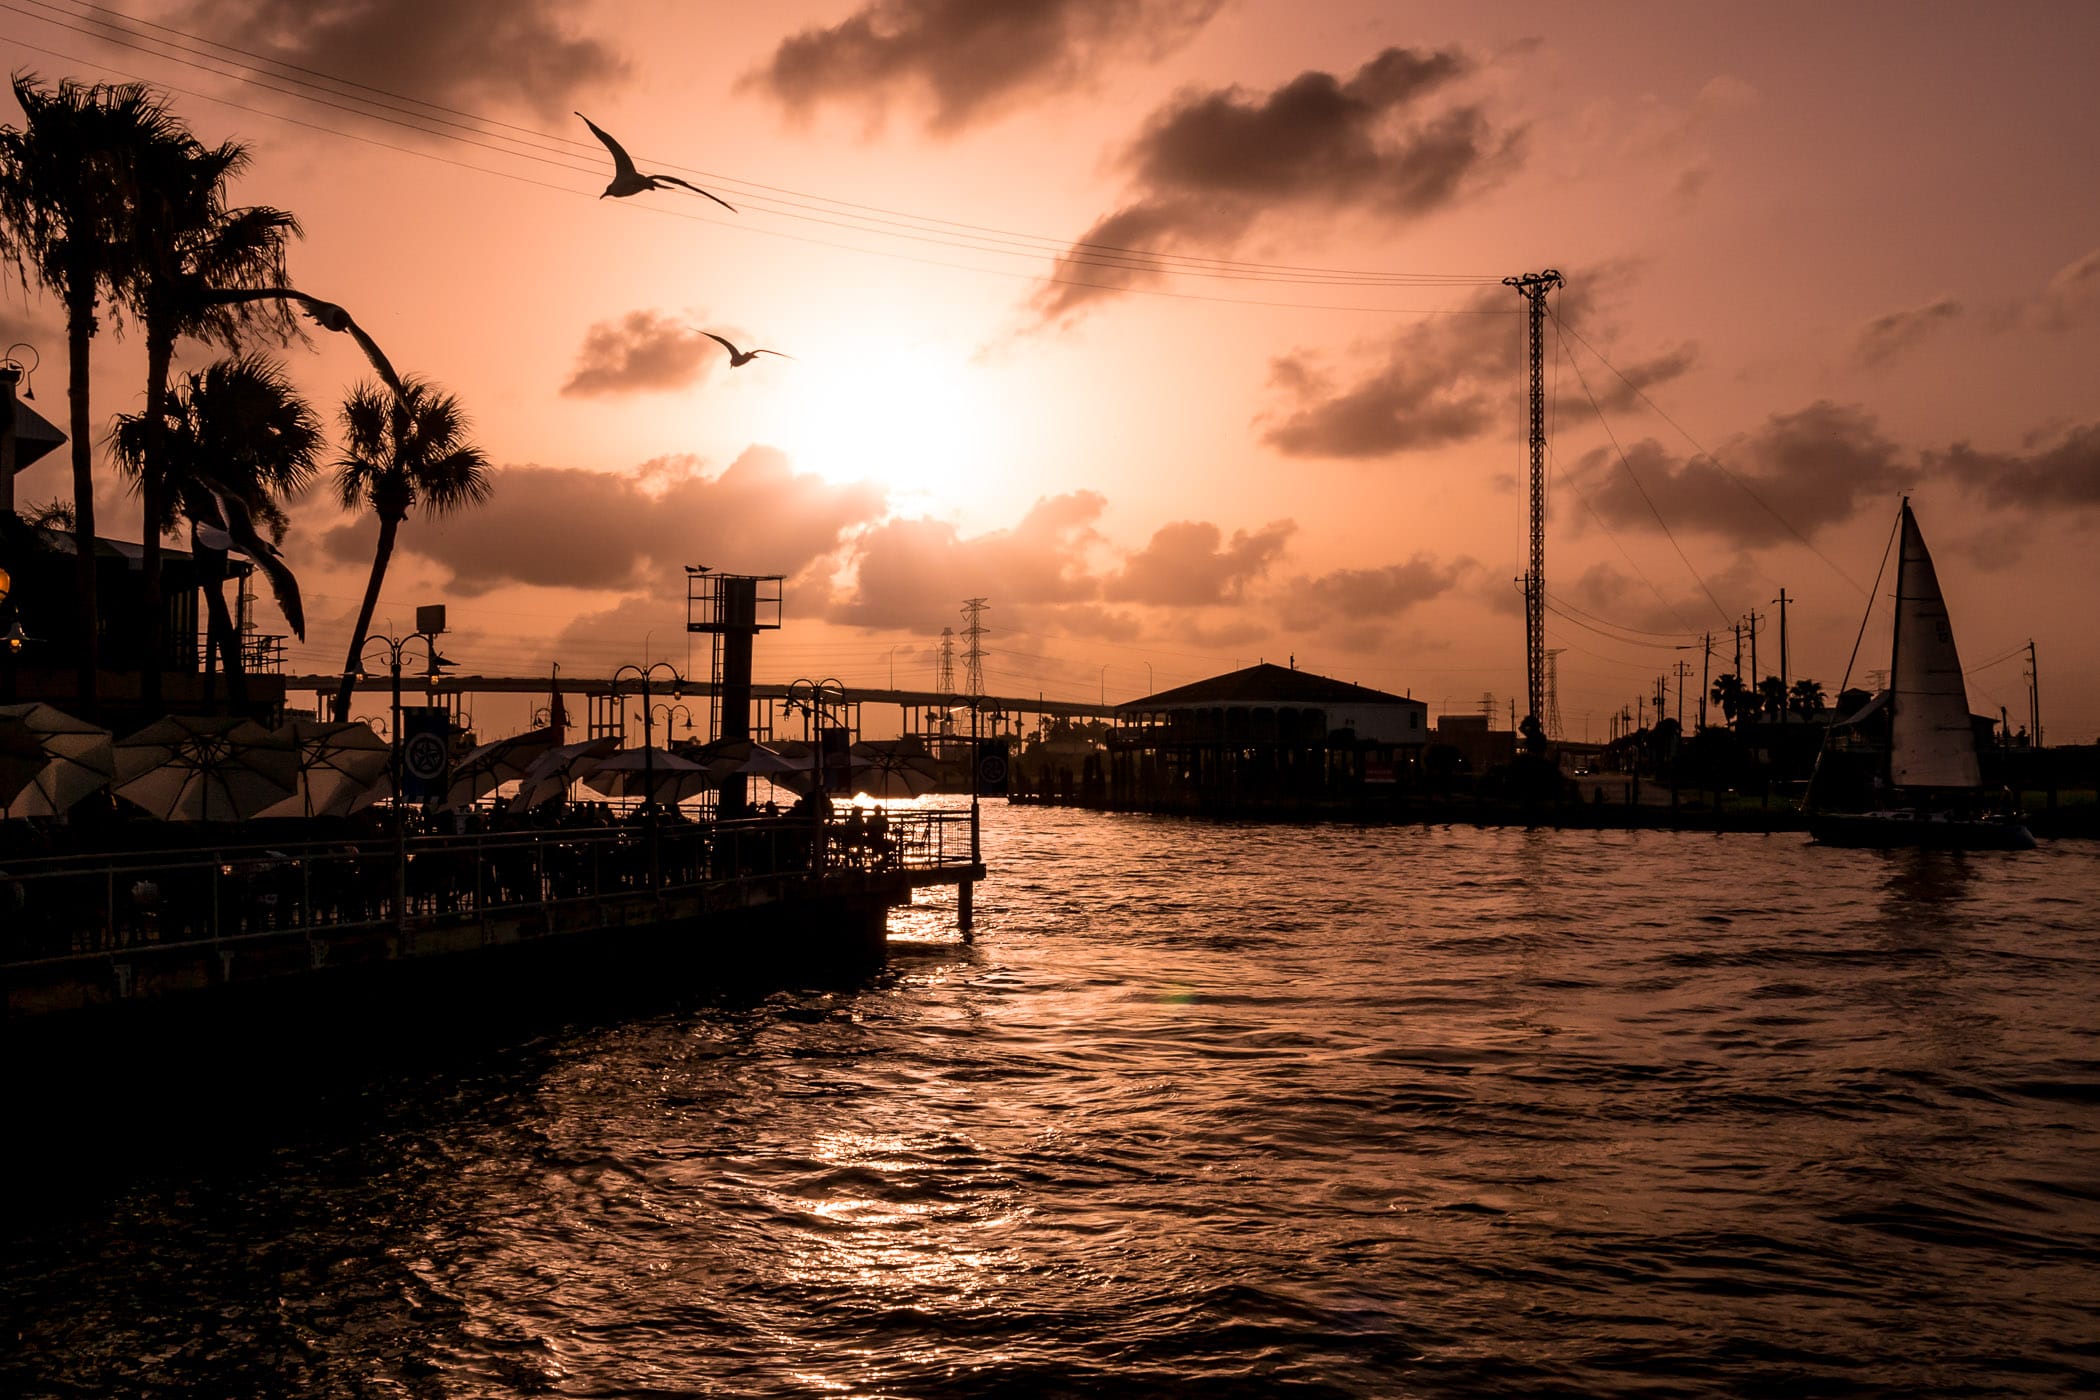 Birds fly by as the sun sets on the Kemah Boardwalk in Kemah, Texas.